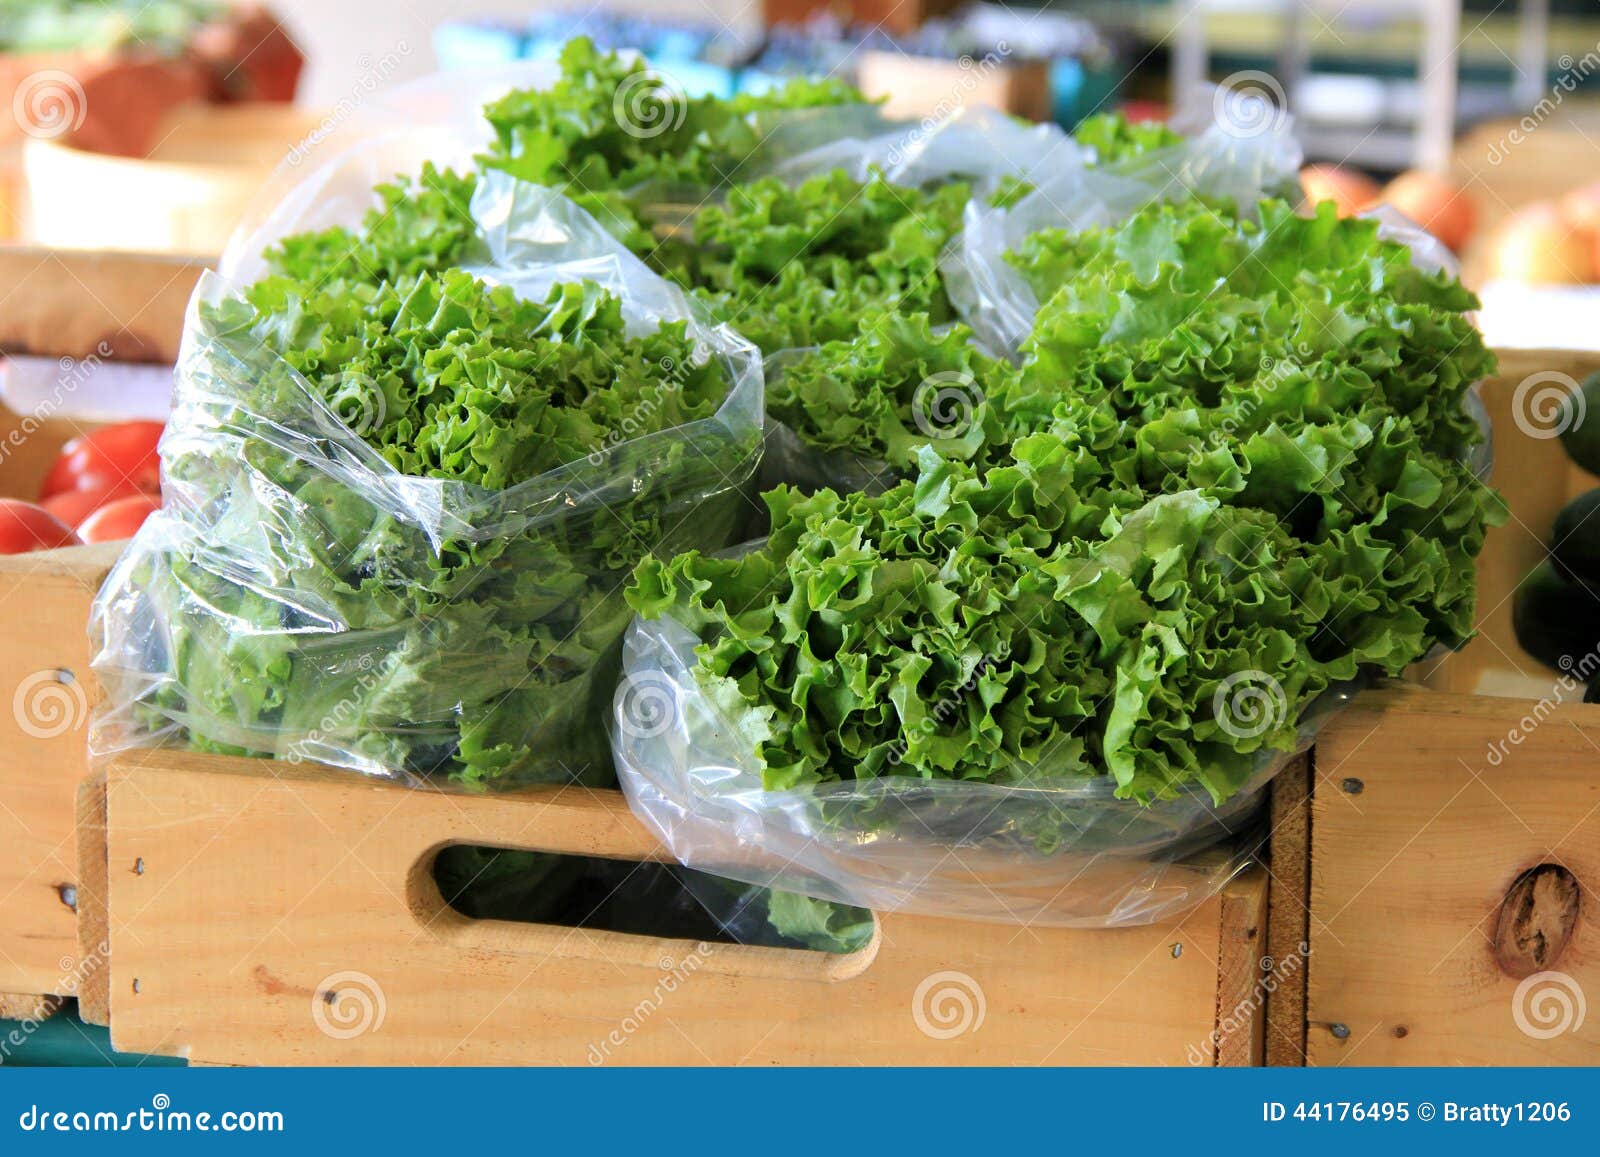 Download Fresh Picked Lettuce In Plastic Bags Stock Image Image Of Harvest Market 44176495 Yellowimages Mockups